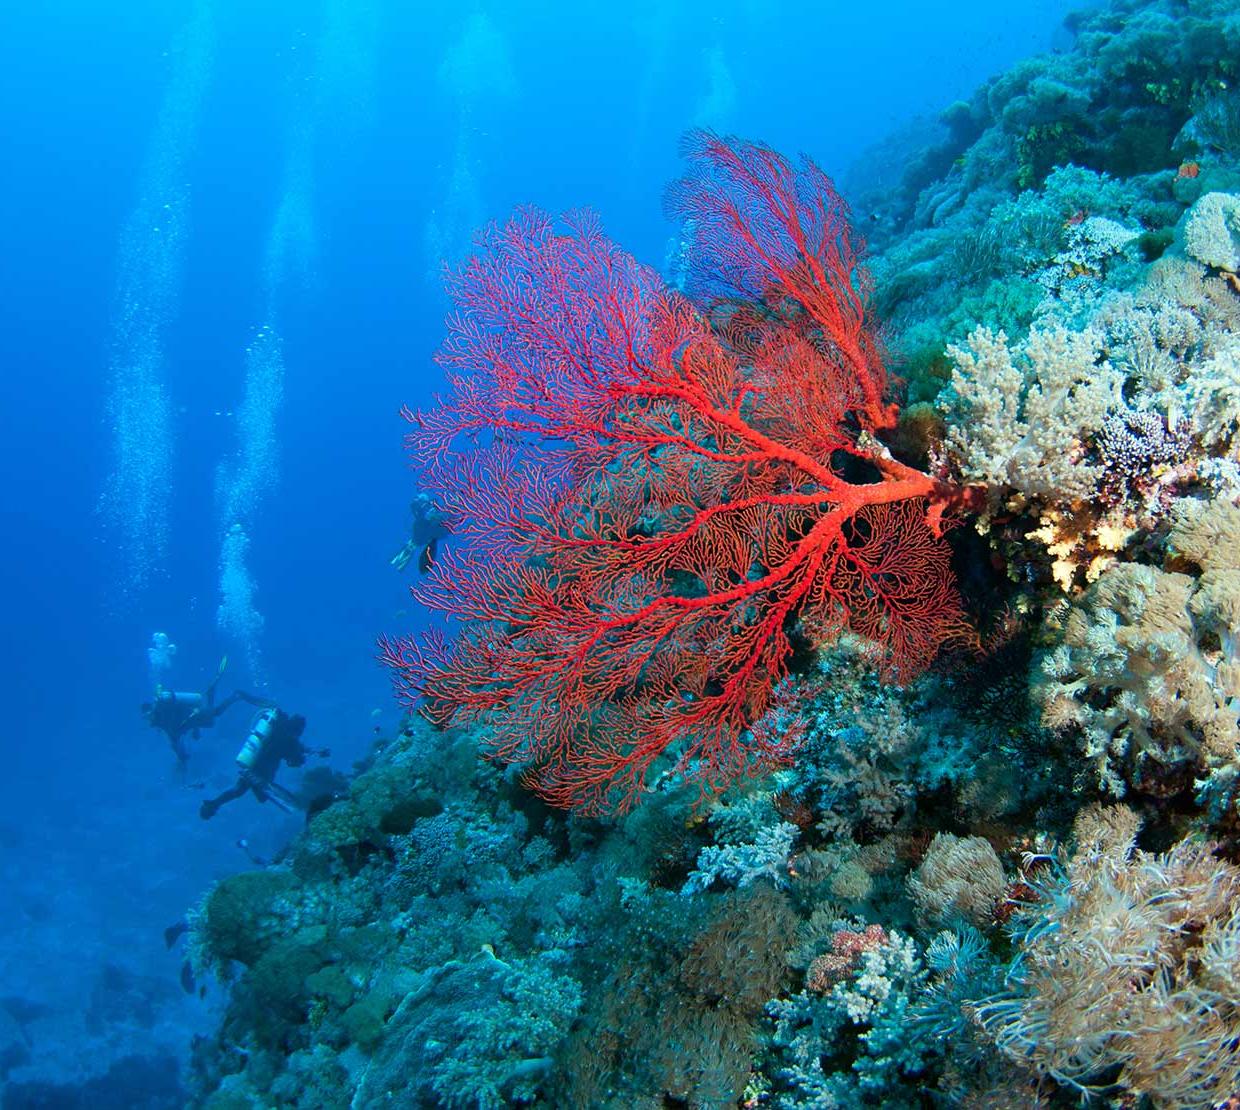 Red Fan Coral on shallow ocean floor